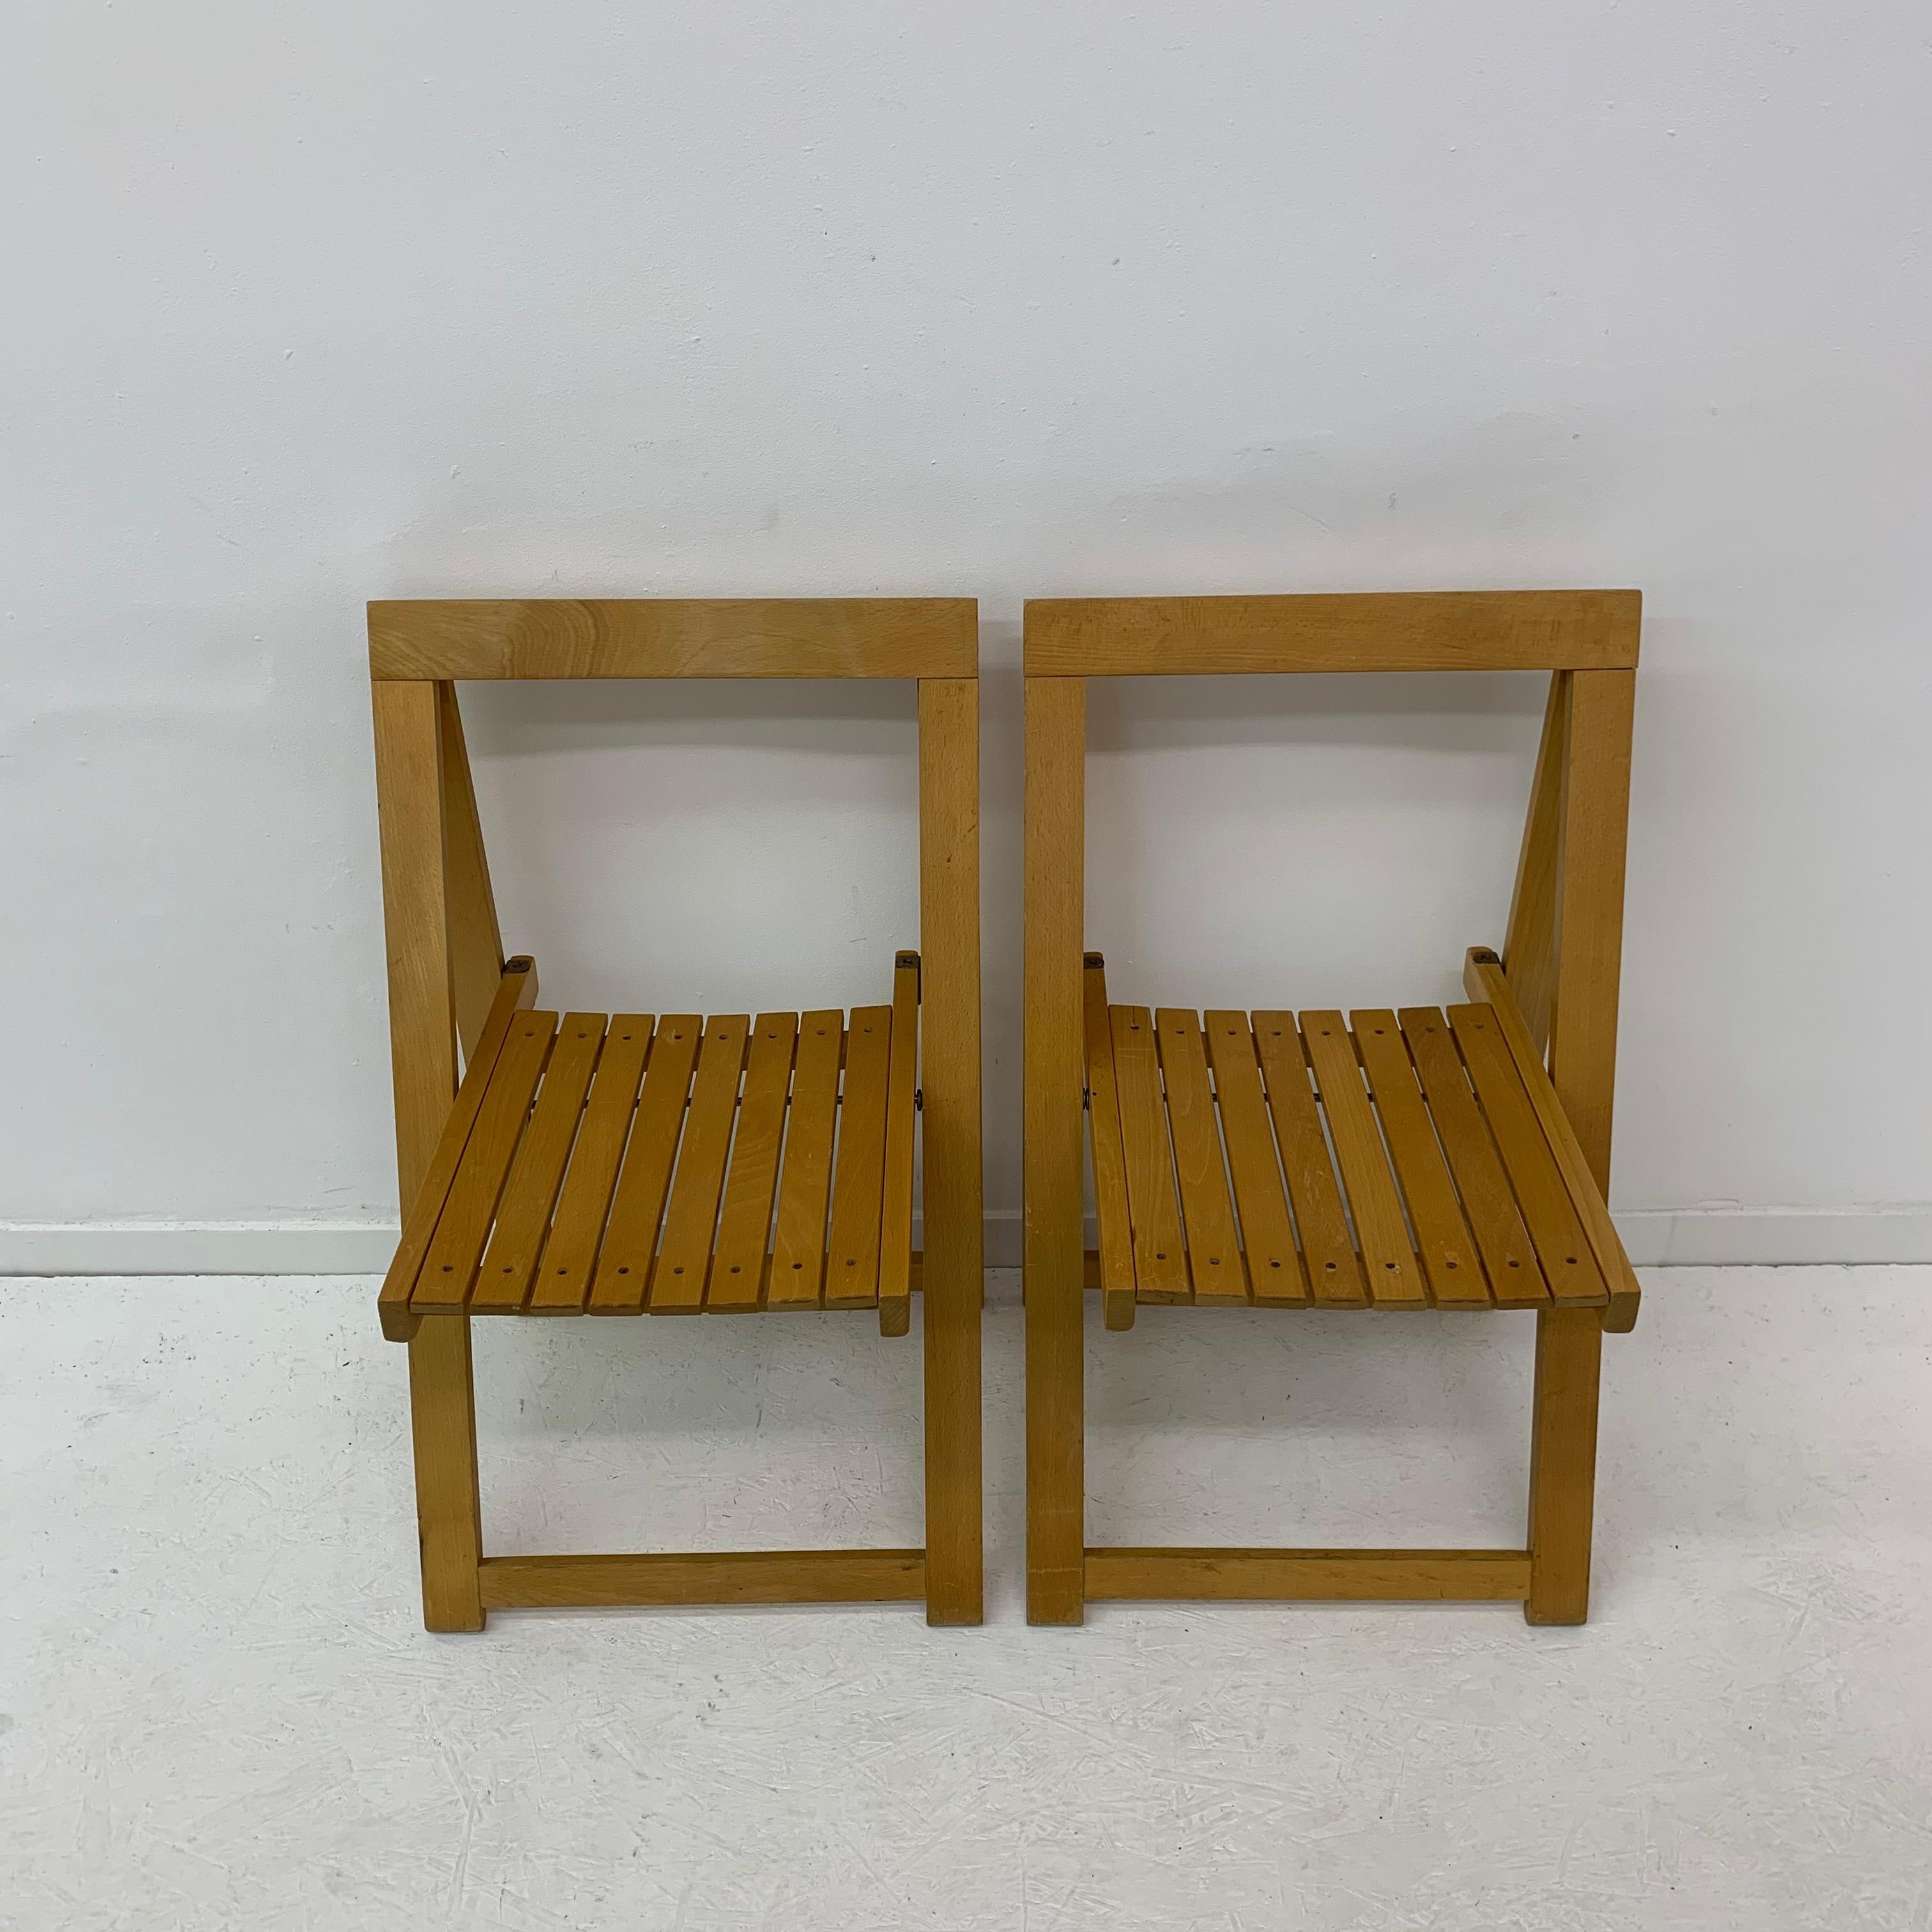 Set of 2 Aldo Jacober for Alberto Bazzani folding chairs, 1960’s For Sale 1